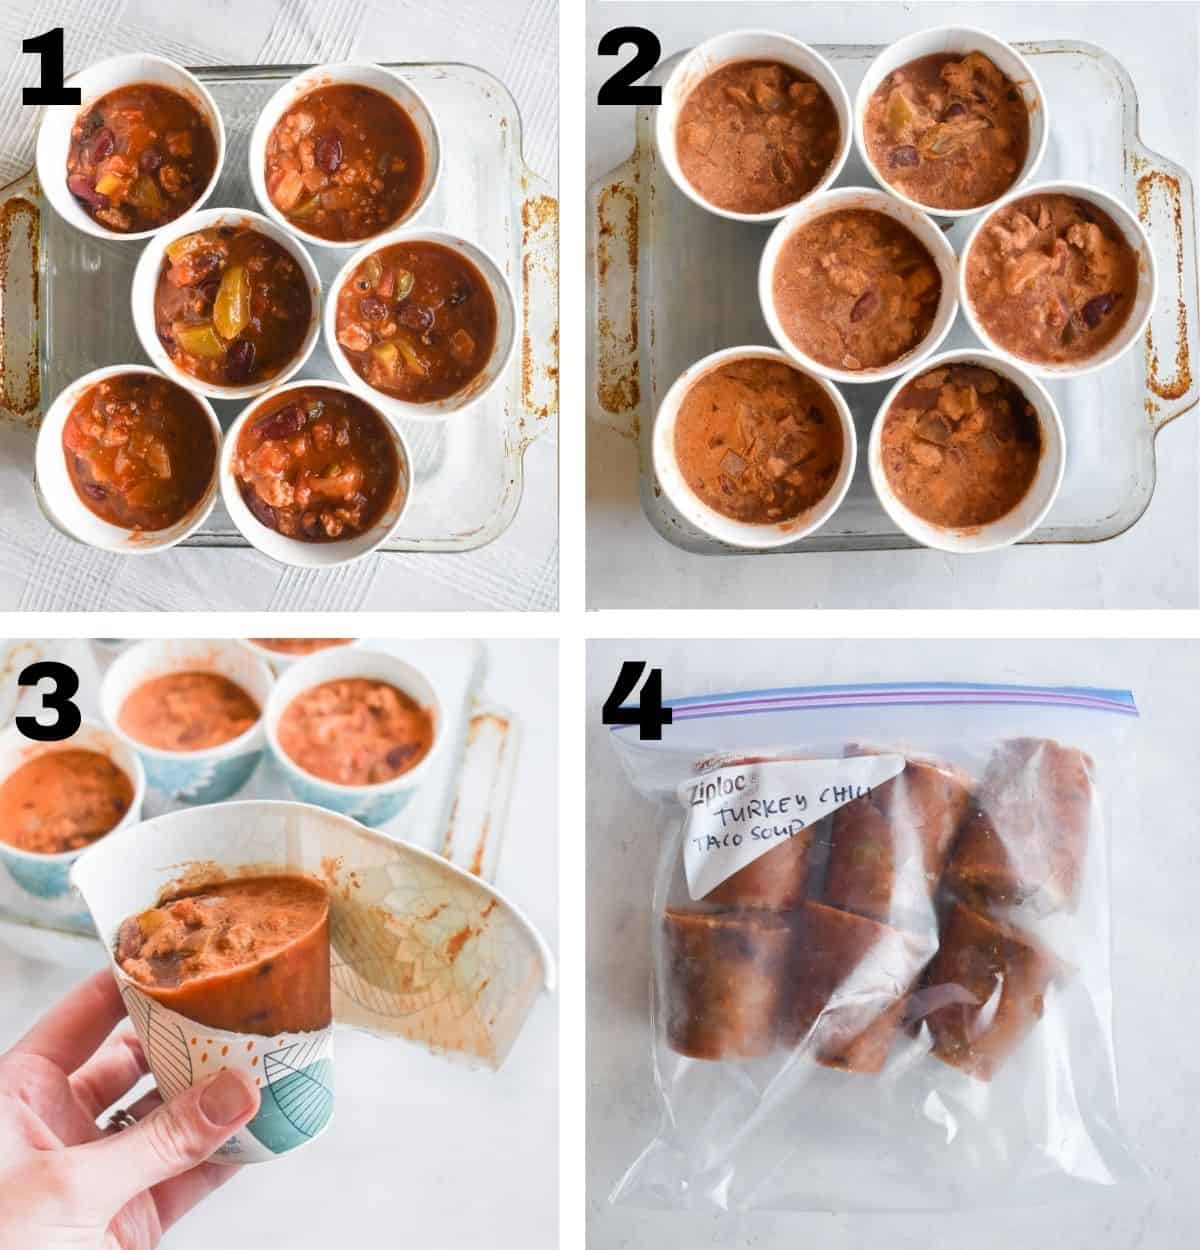 4 photos showing how to freeze the soup in paper cups and then store in freezer.